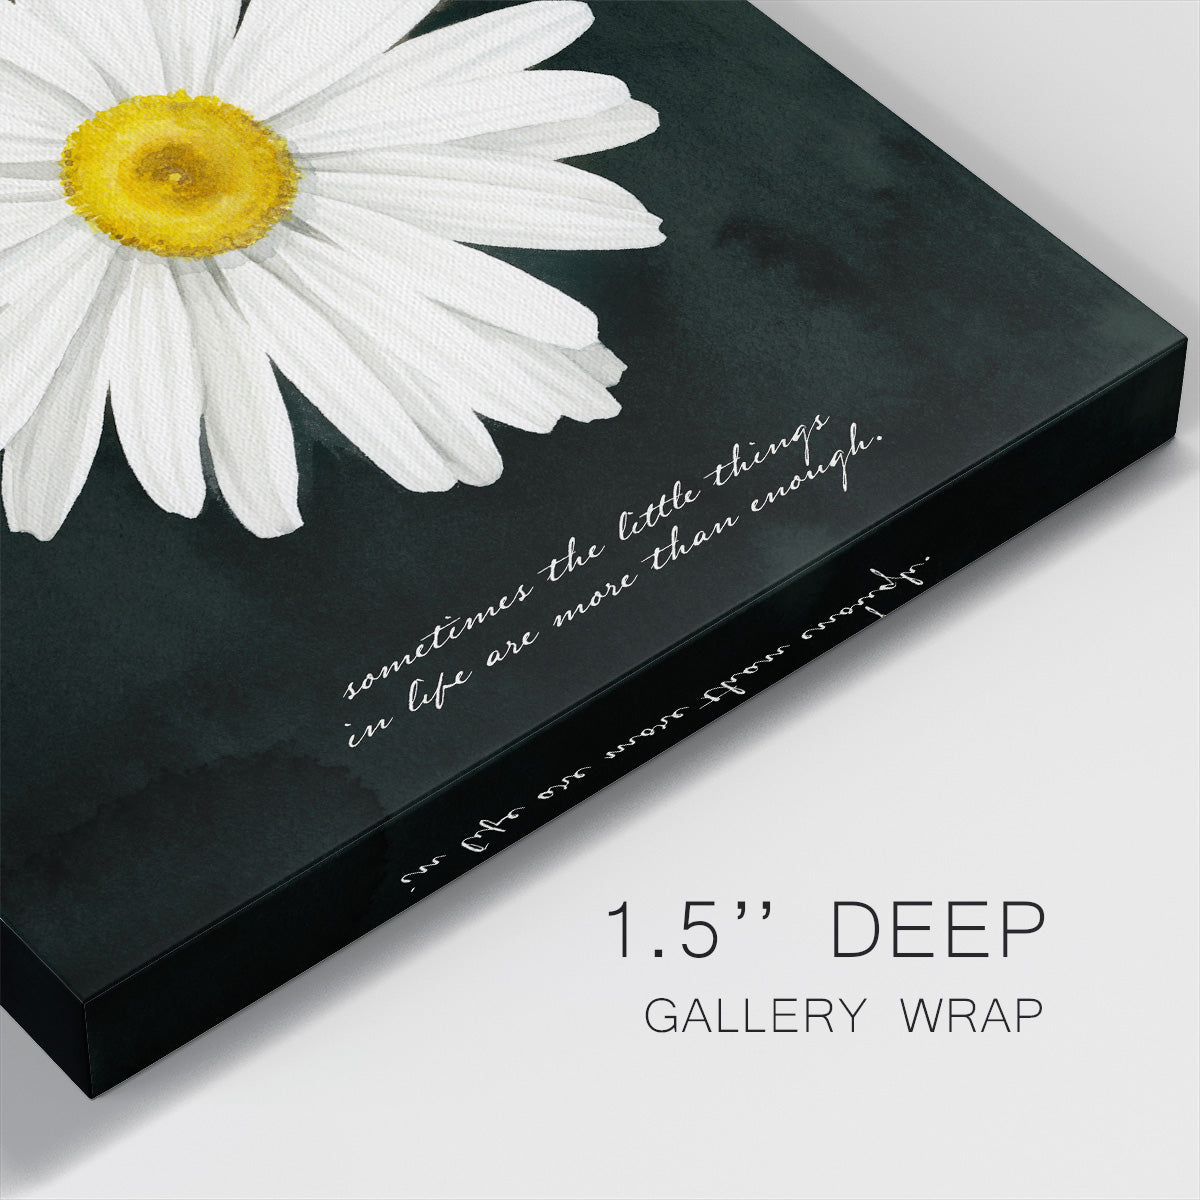 Delicate Daisy I-Premium Gallery Wrapped Canvas - Ready to Hang